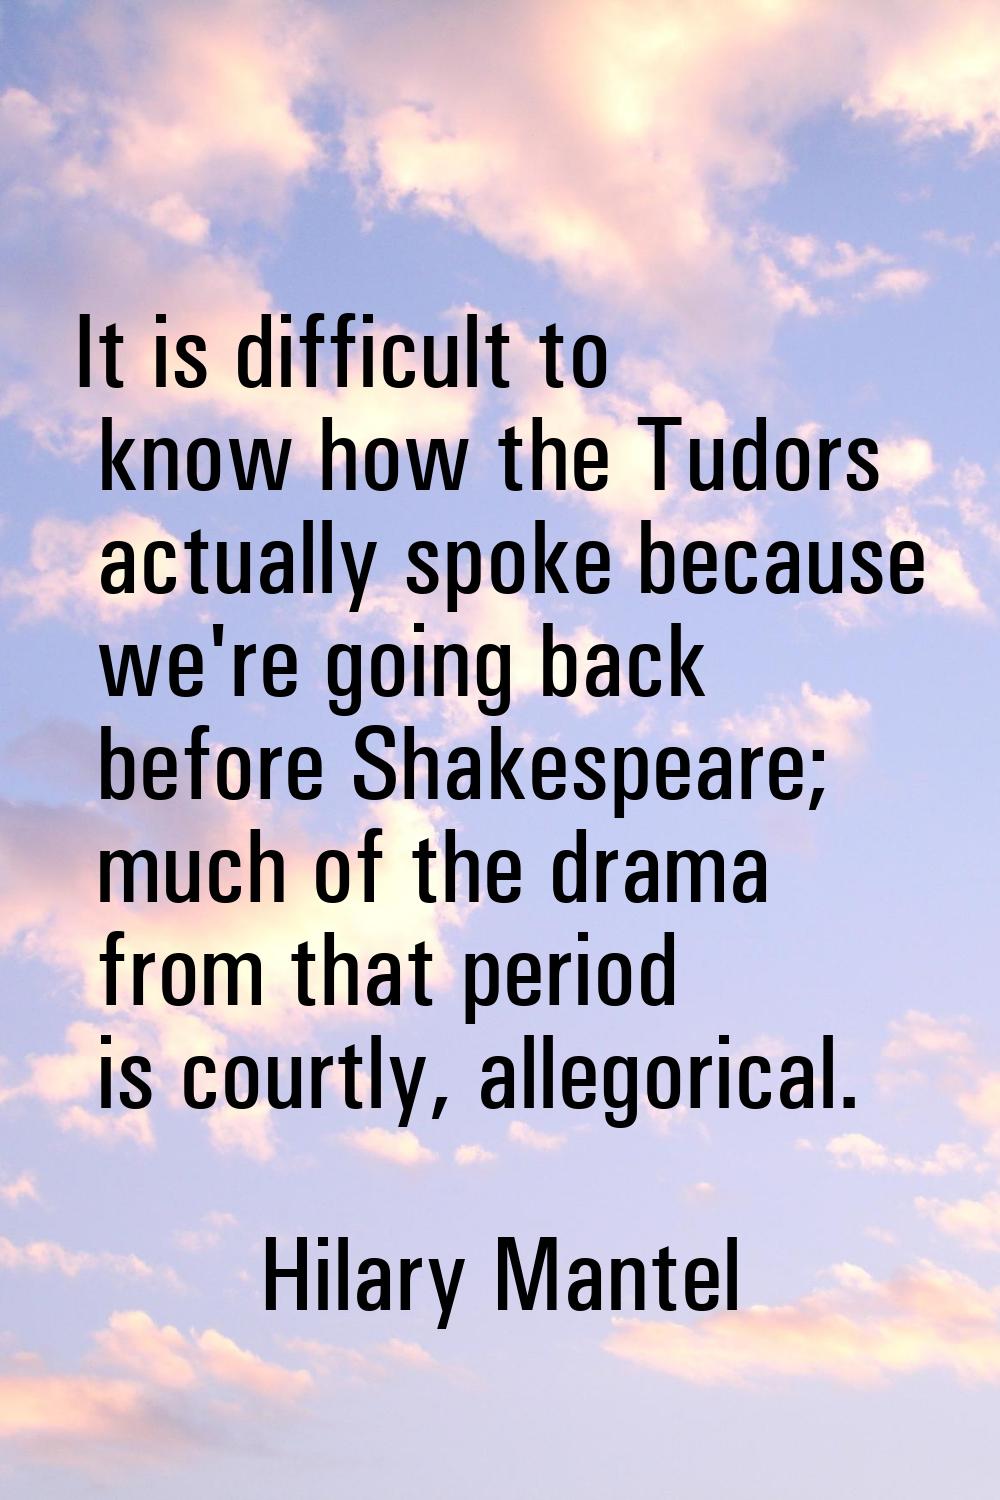 It is difficult to know how the Tudors actually spoke because we're going back before Shakespeare; 